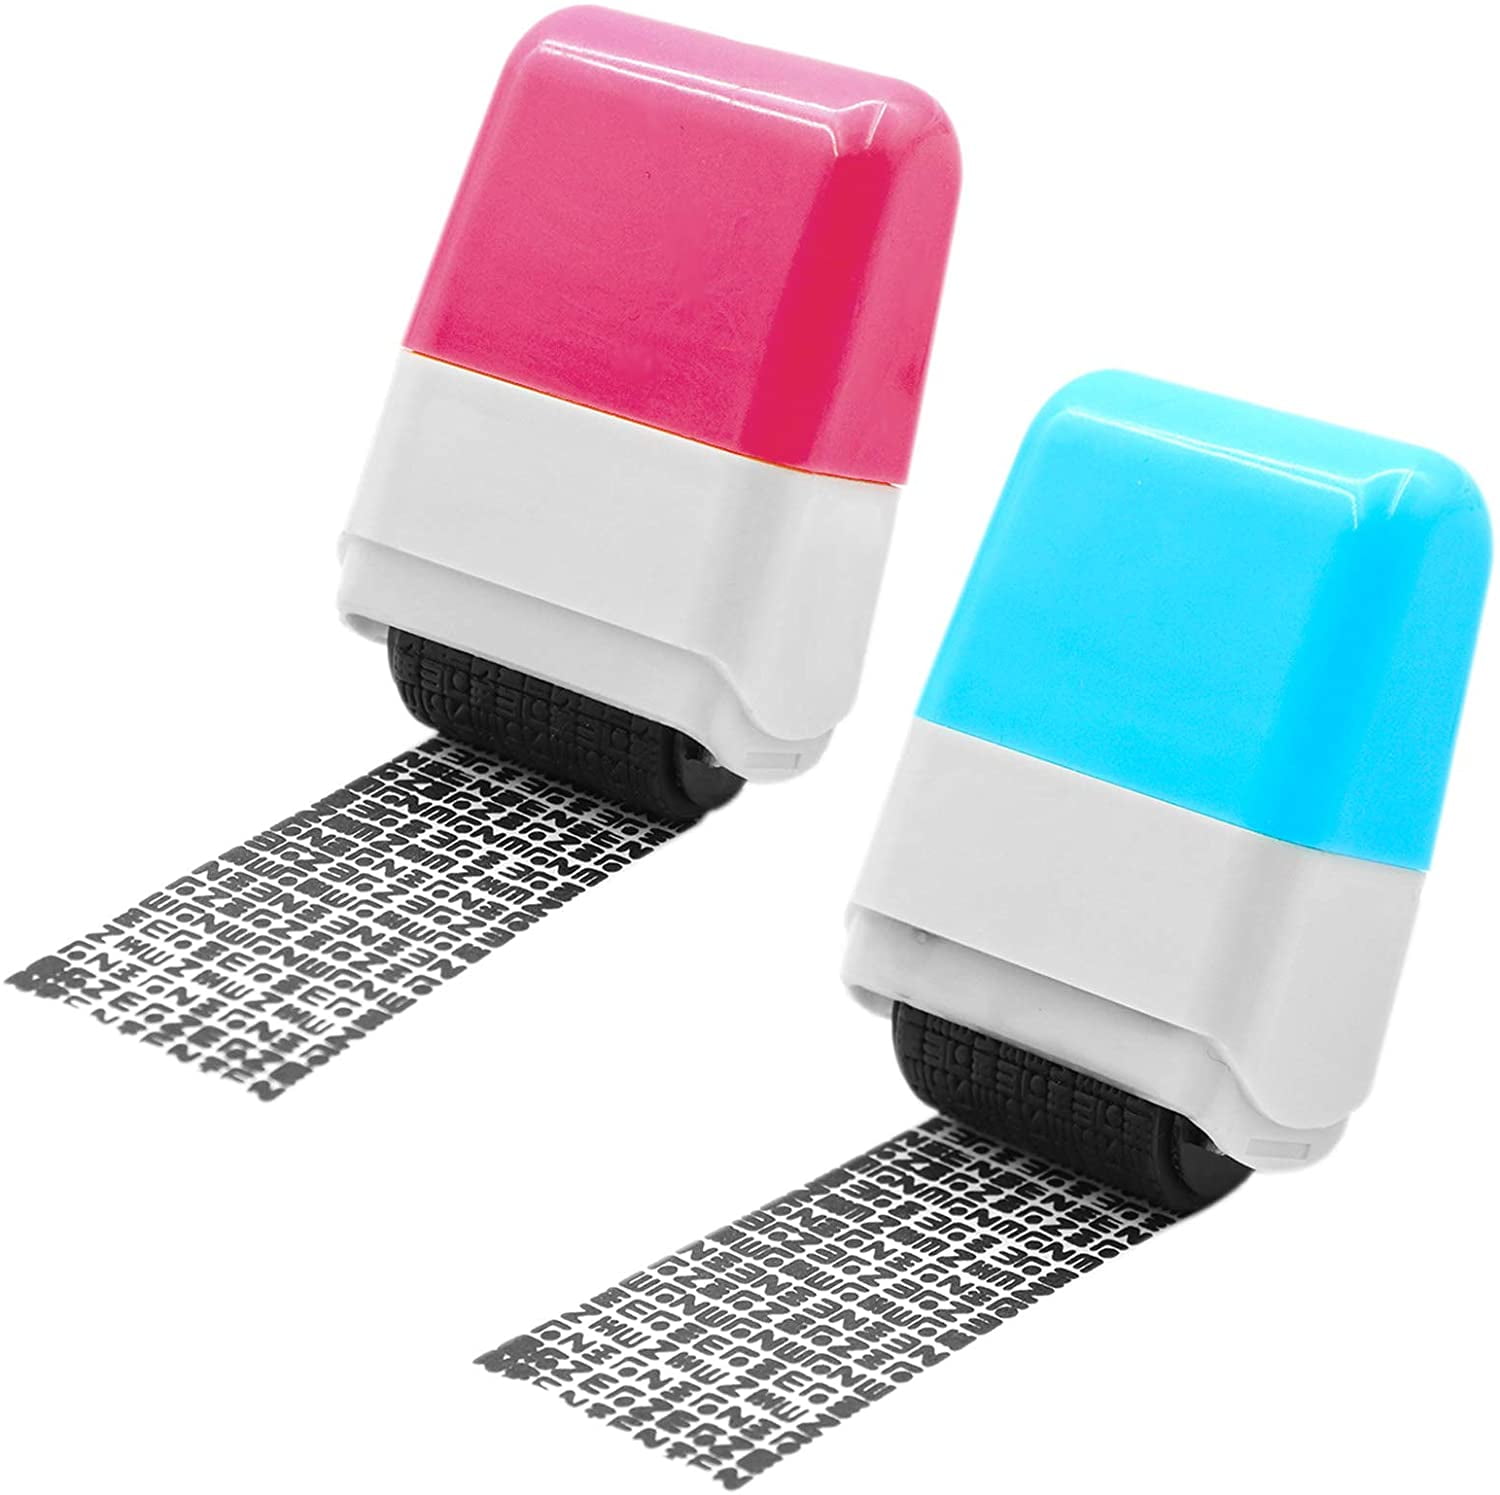 Identity Theft Protection Roller Stamp Guard Your ID Confidential Privacy I8J4 